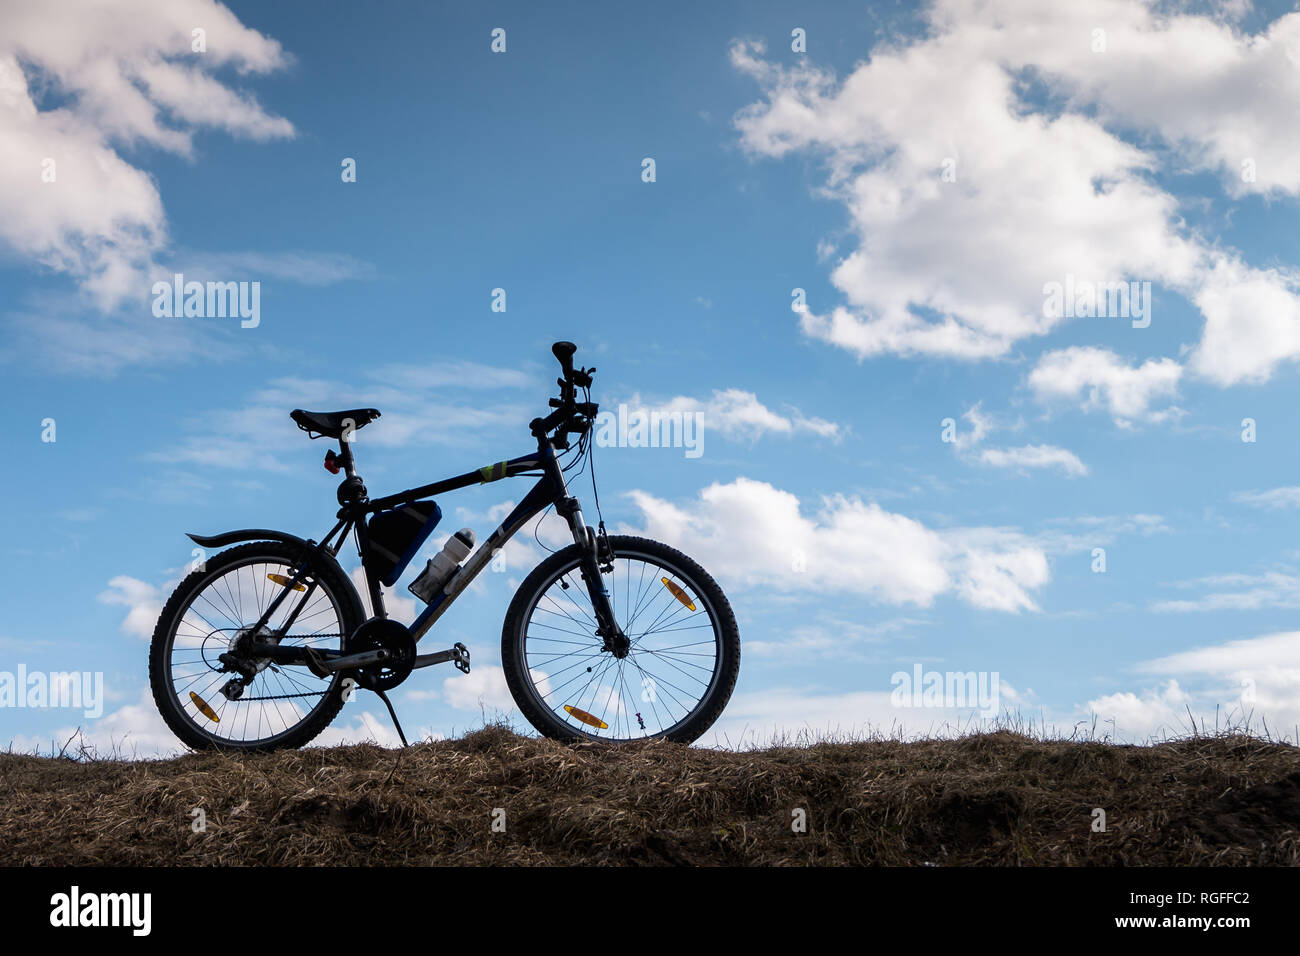 Bike silhouette in blue sky with clouds. symbol of independence and freedom Stock Photo